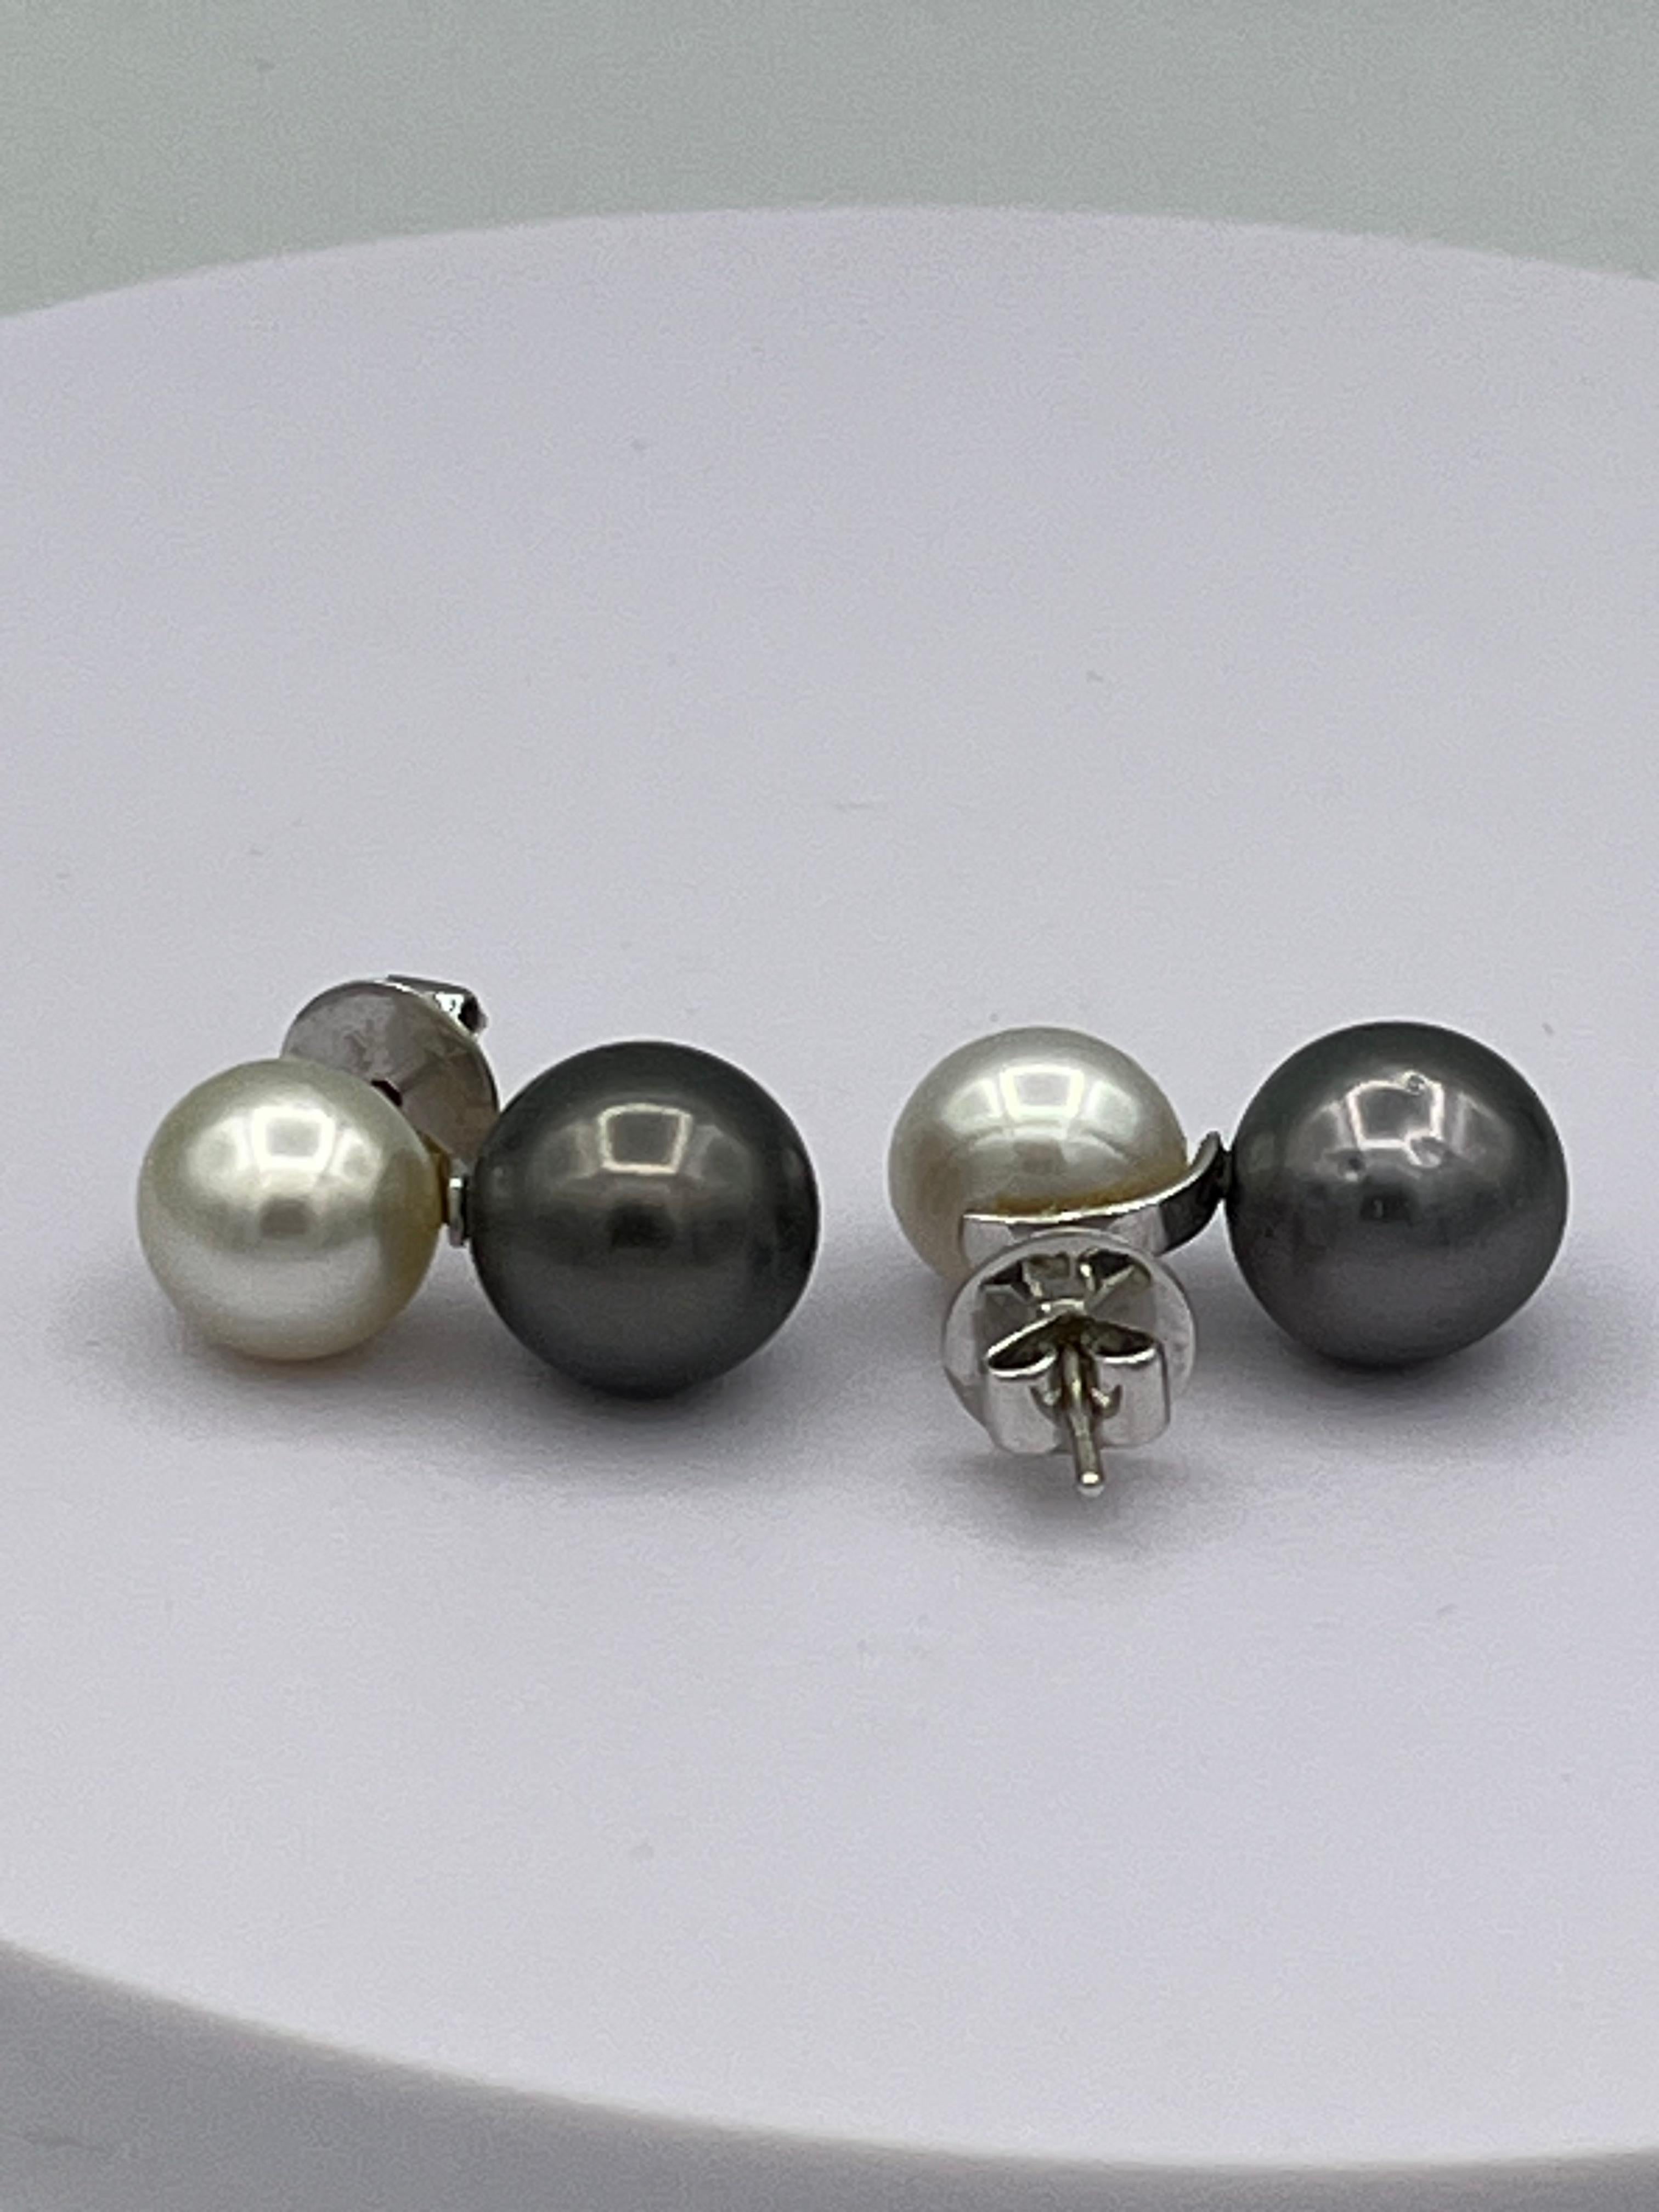 18 k white gold 
on top 1 south sea white pearl diameter 8 mm
1 Tahiti pearl  gray diameter 10 mm
weight 9,44 gram
long 2 cm
It is the perfekt earring for every day